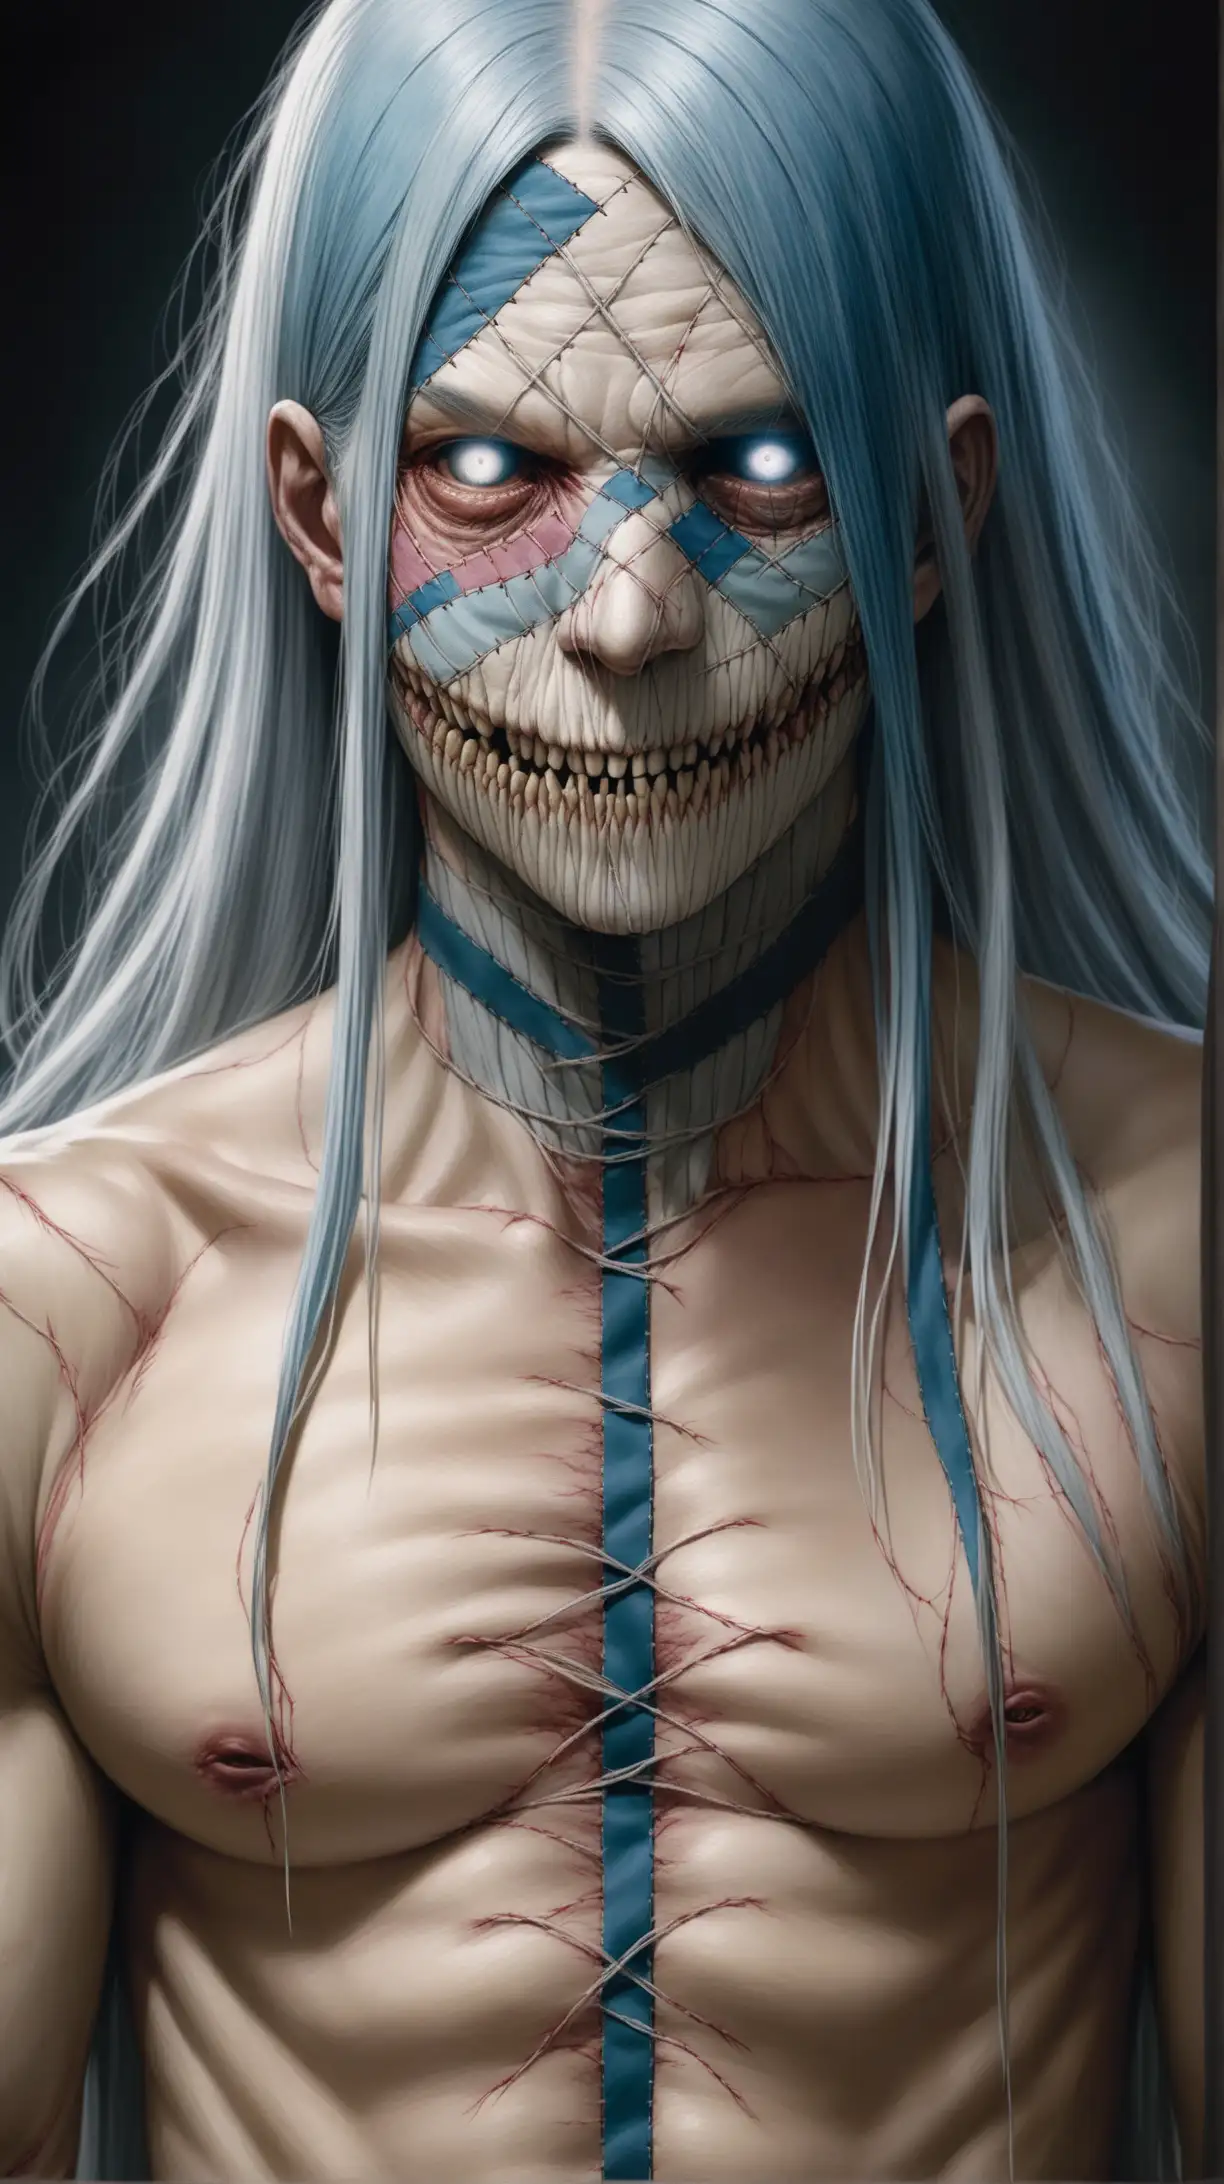 PhotoRealistic Cursed Spirit with Stitched Patchwork Face and Gray Eyes